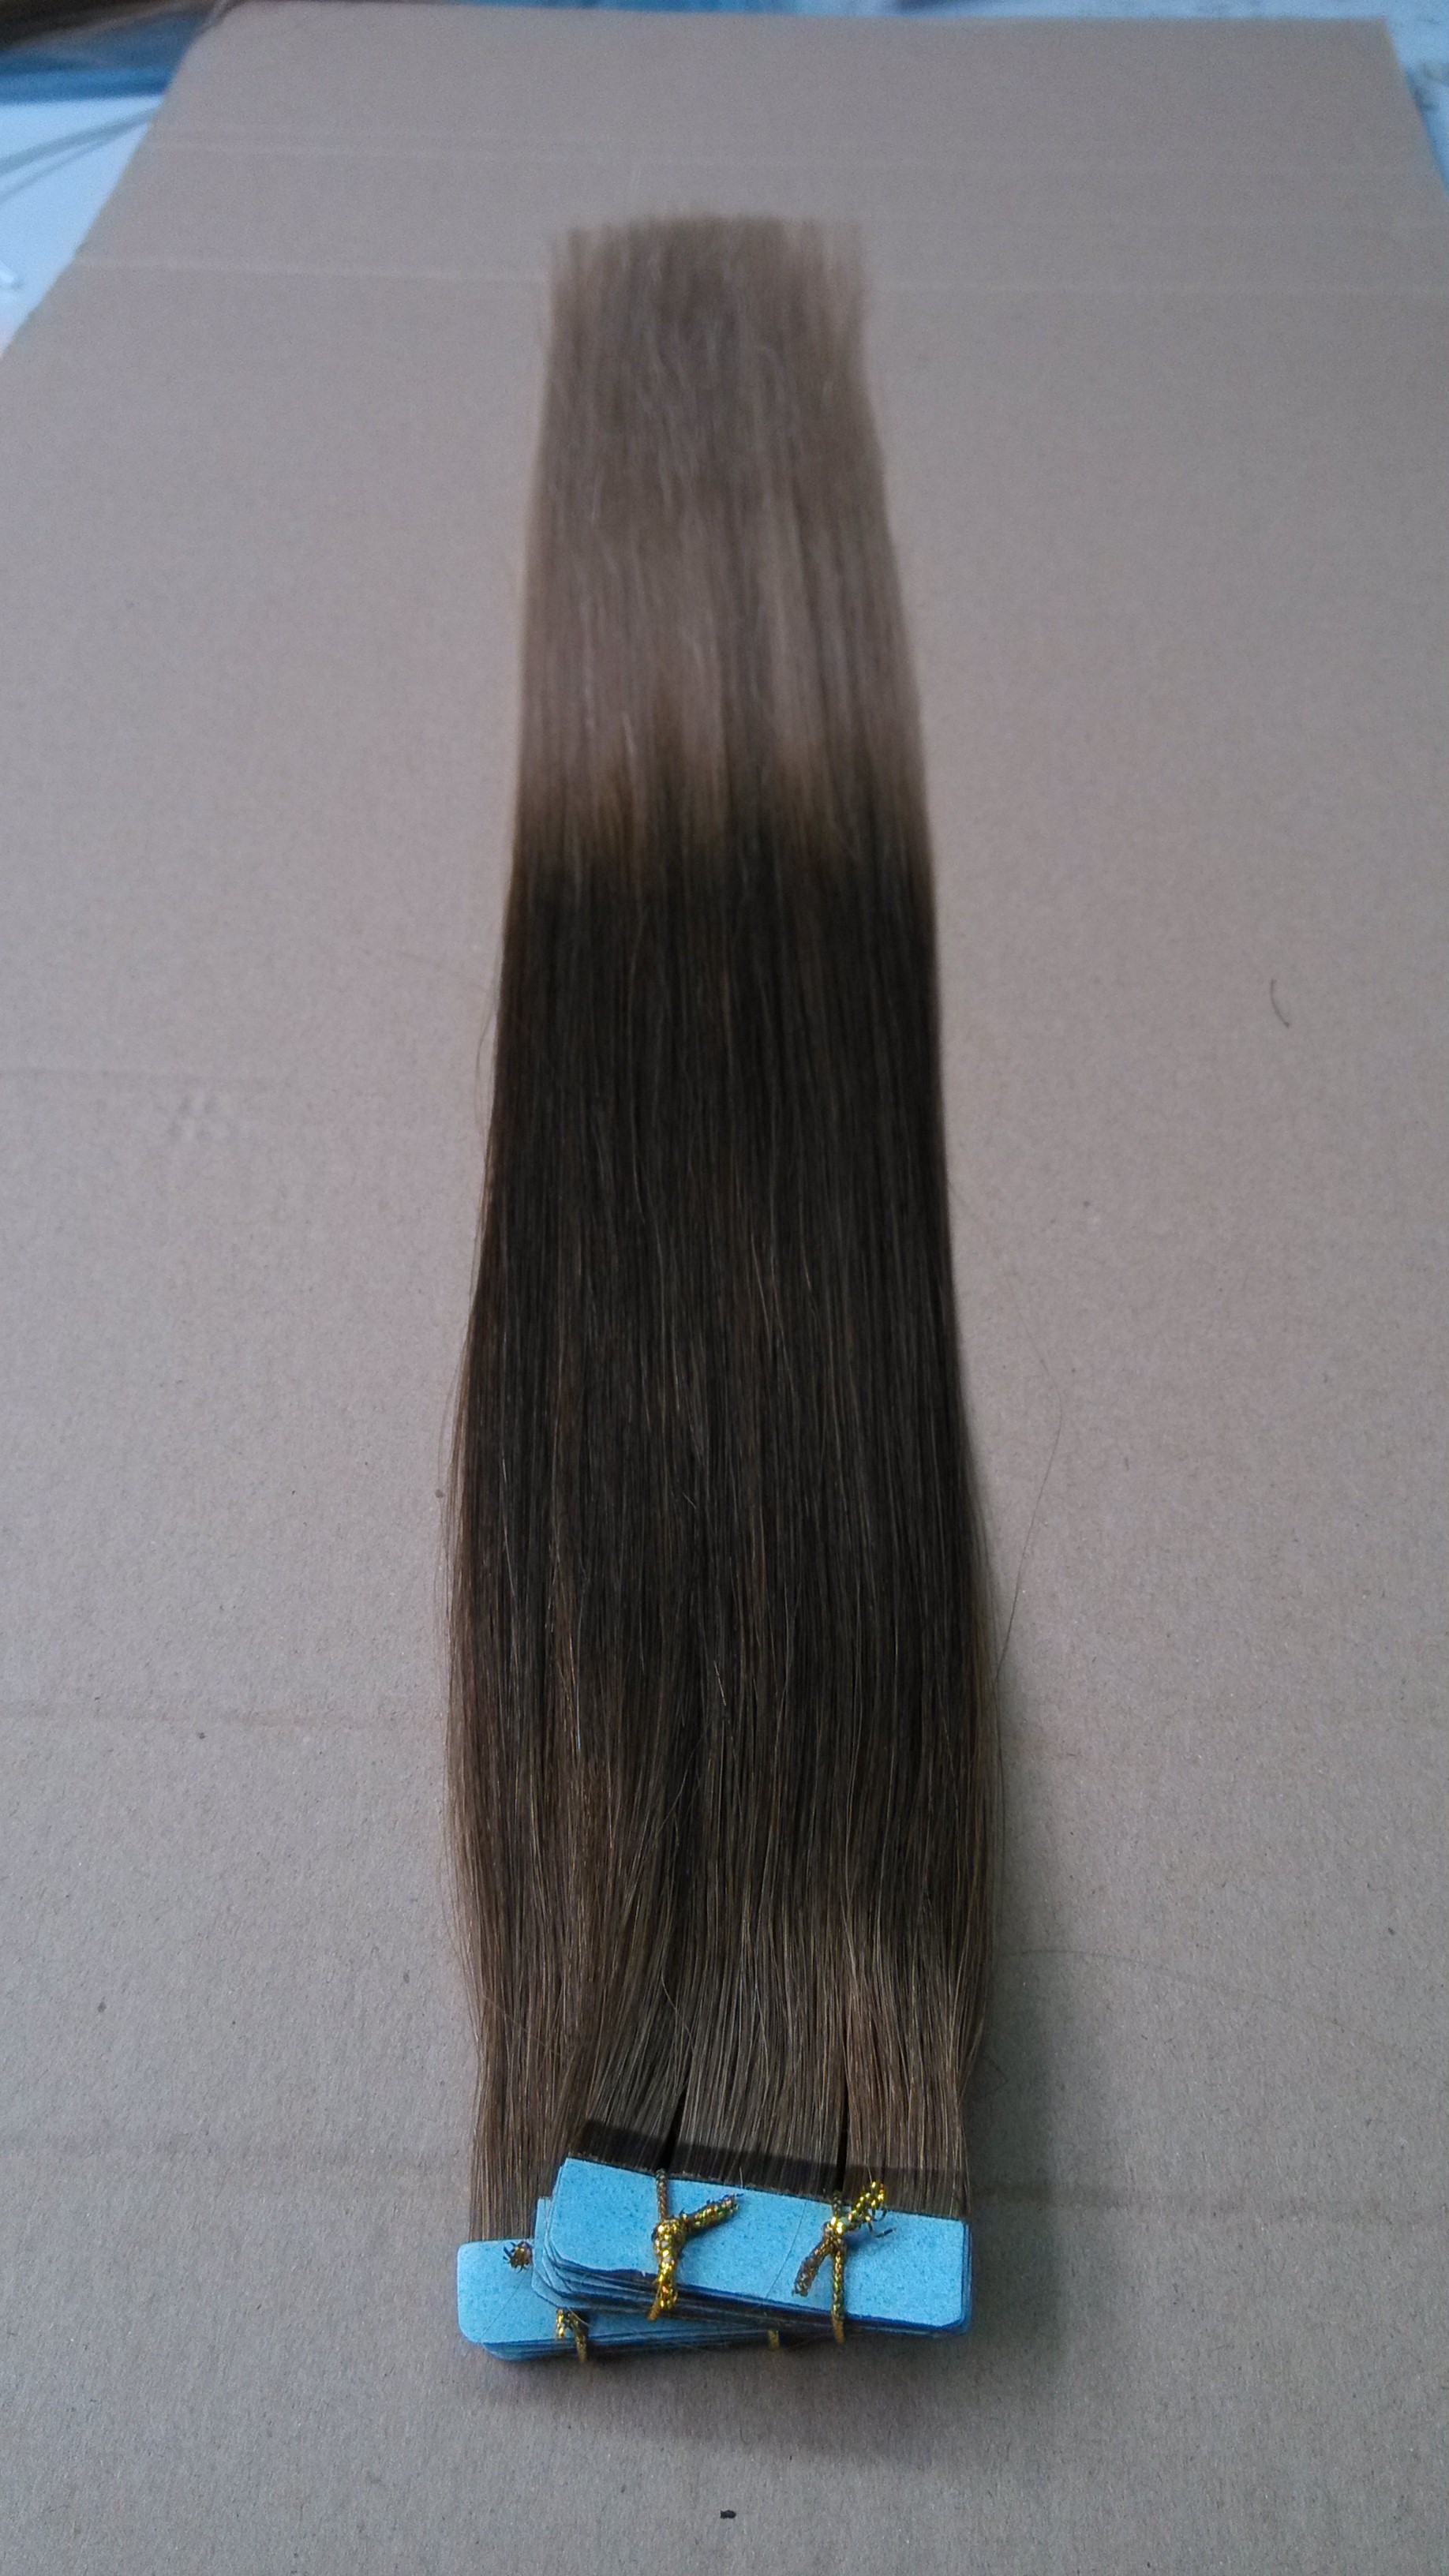 High quality Wholesale Tape hair Extensions,100% Remy Tape in Hair Extensions,Hot Sell Hair Accessory